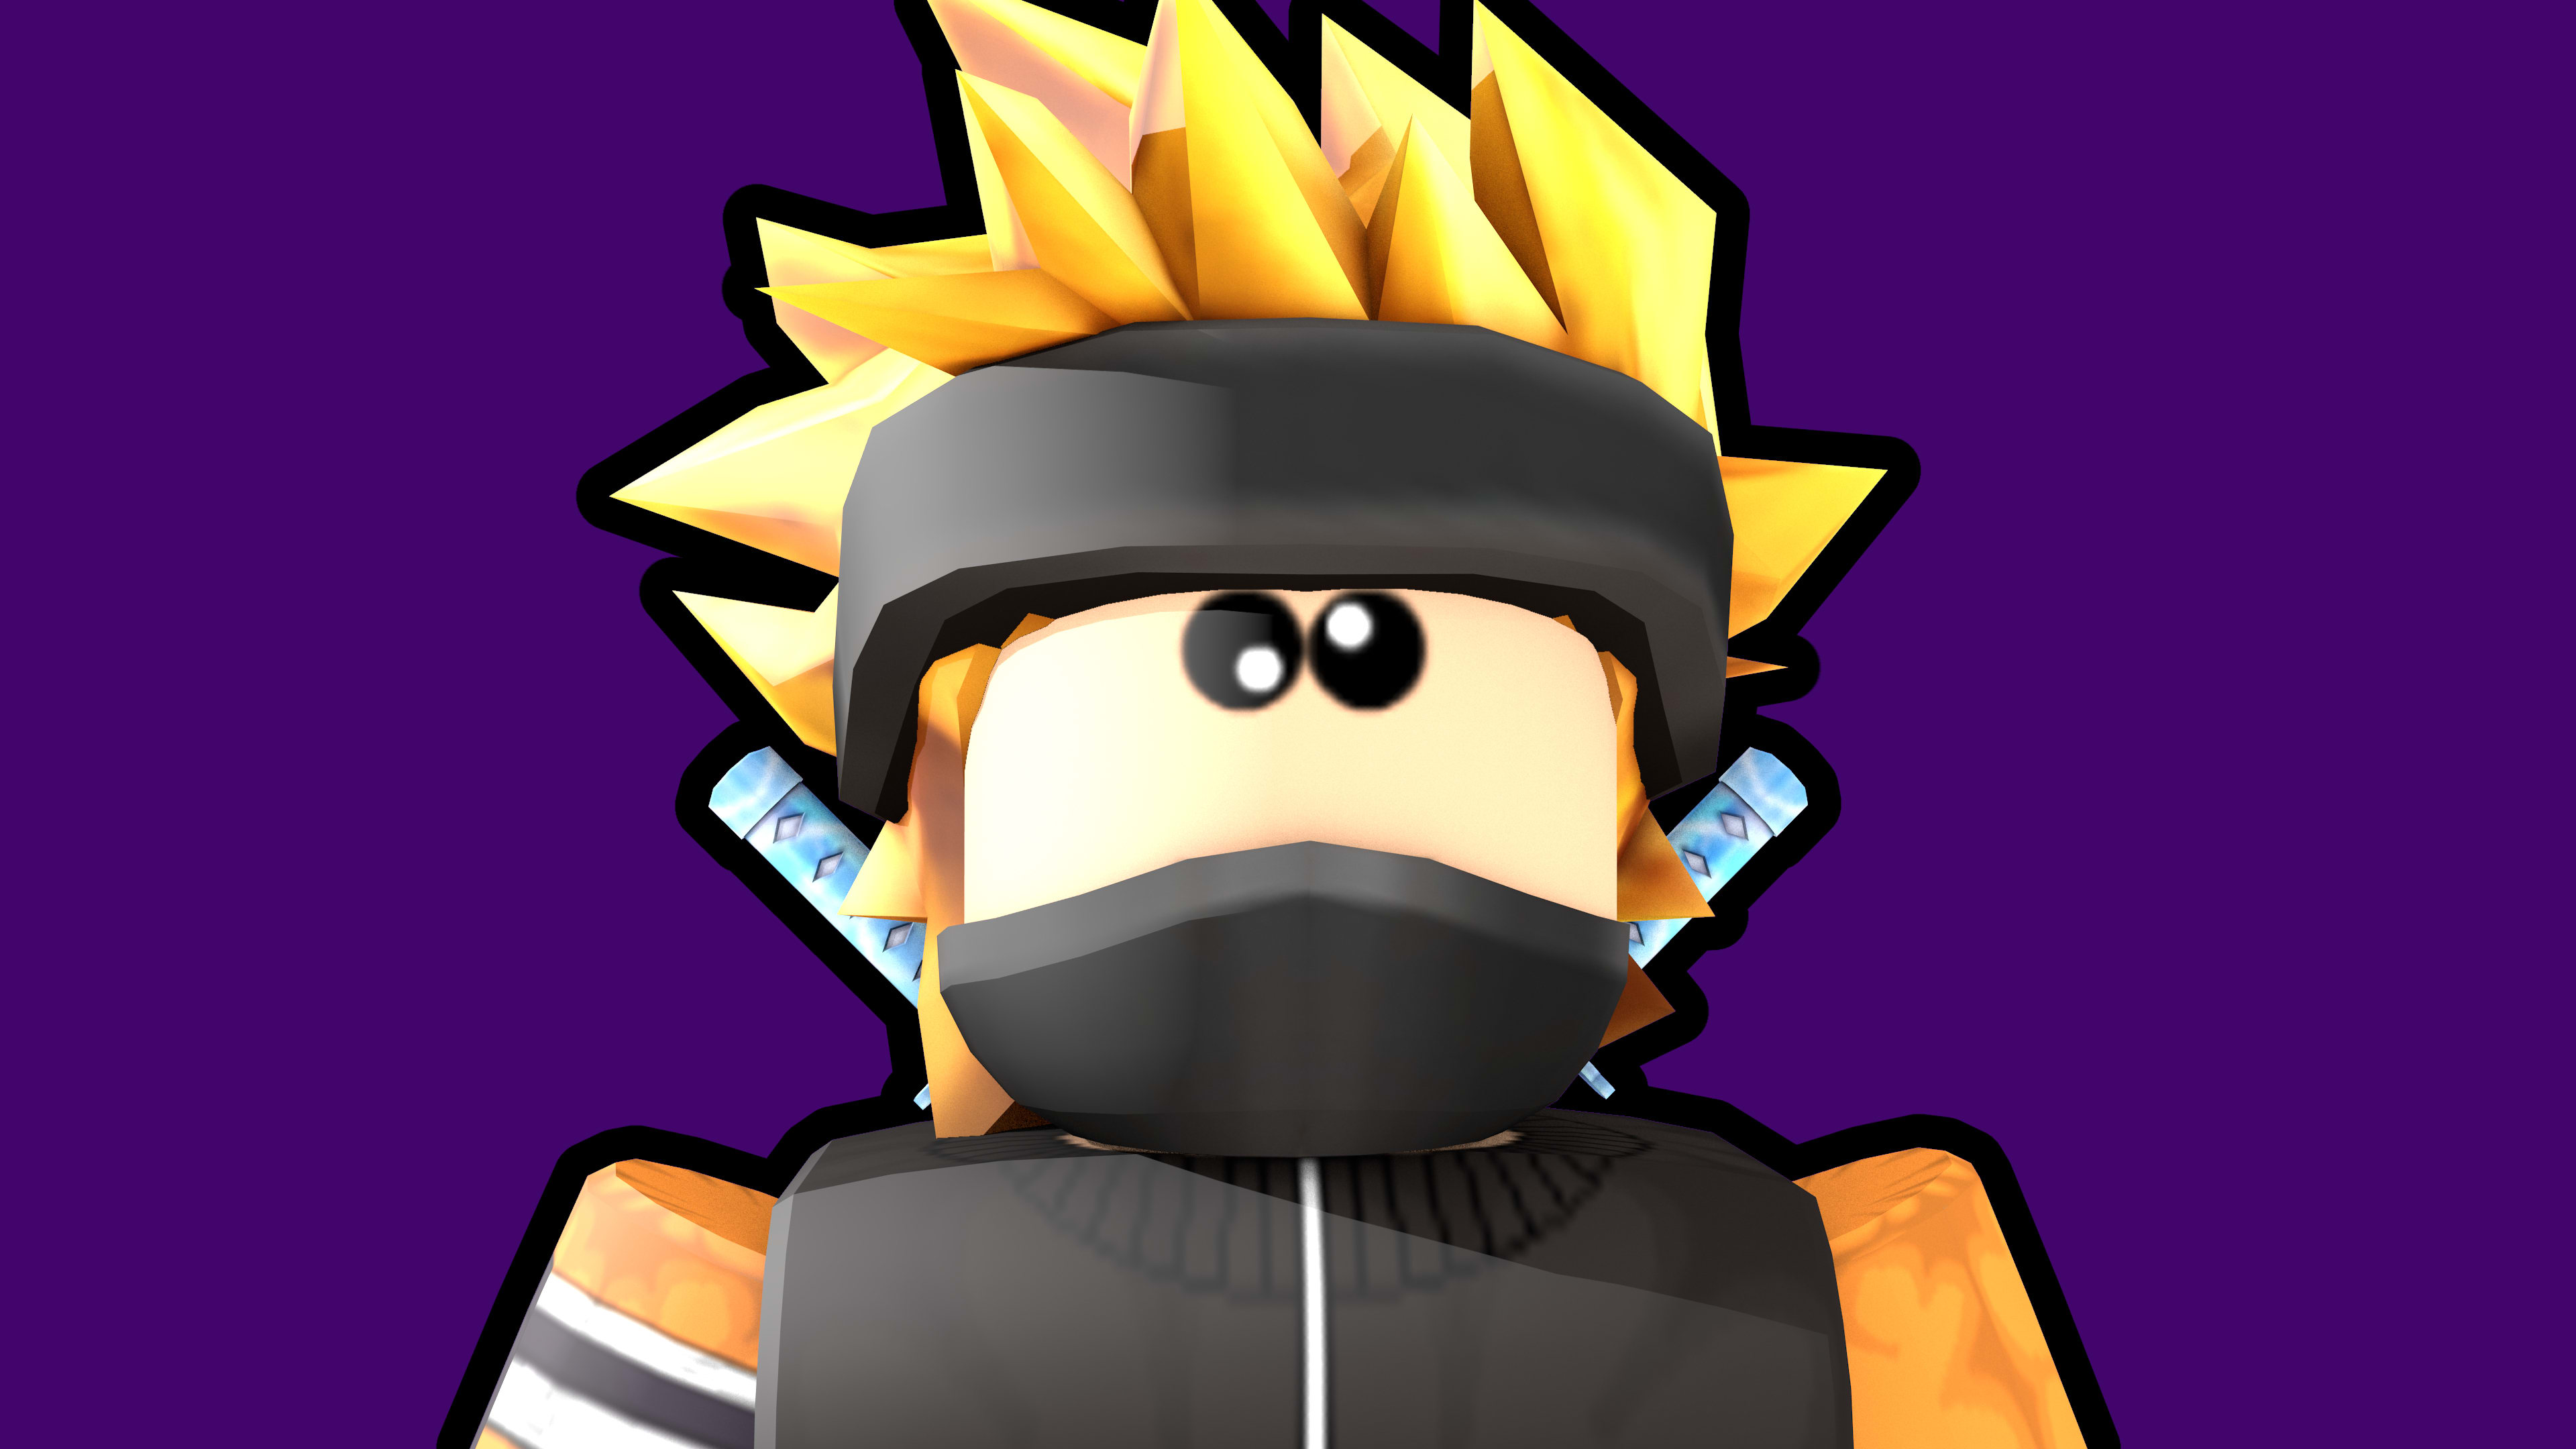 Create A Roblox Character Render By Jim8ob714 - oxfries i will create your roblox avatar as pixel art for 5 on wwwfiverrcom